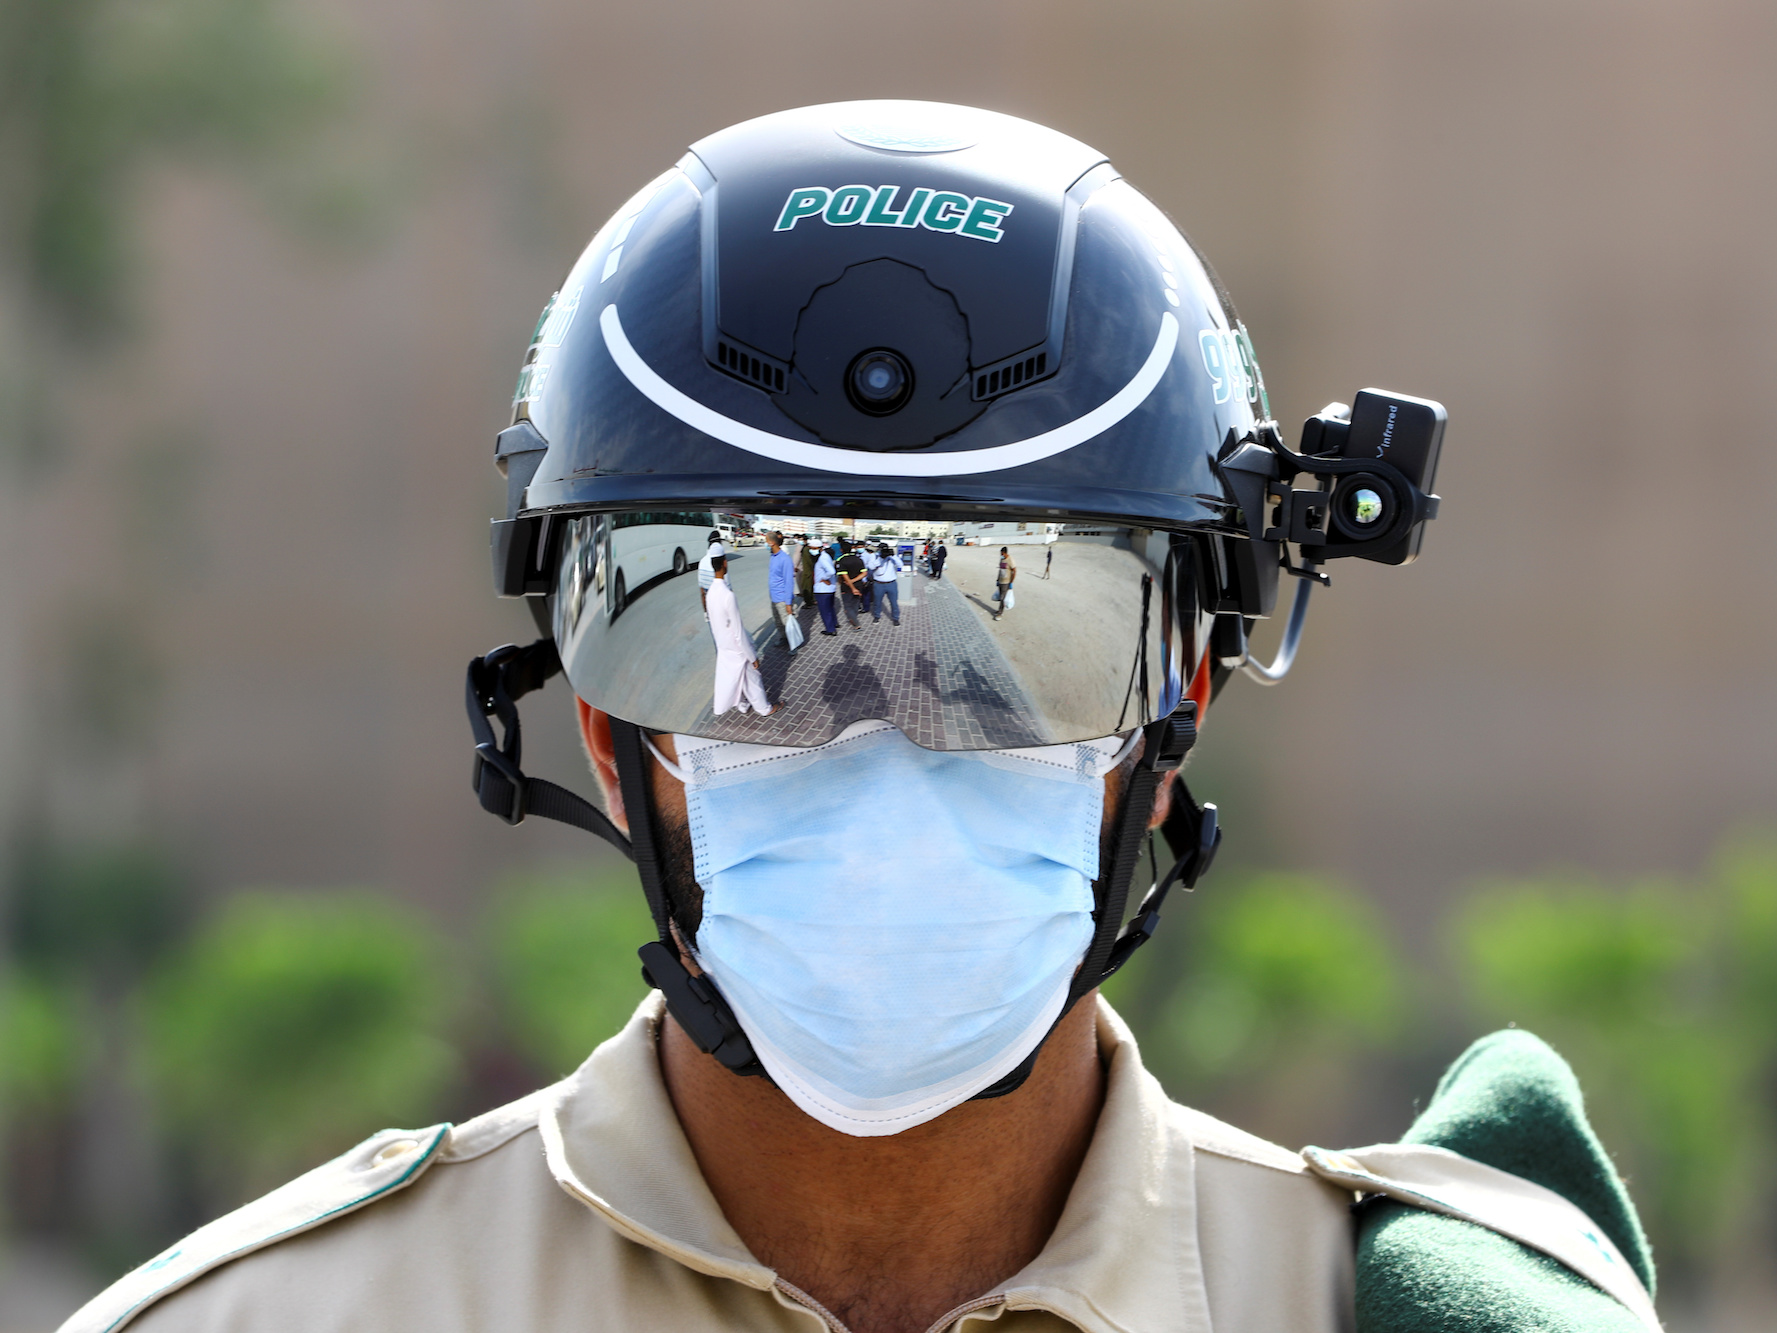 Police in China, Dubai, and Italy are using these surveillance helmets to scan people for COVID-19 fever as they walk past and it may be our future normal